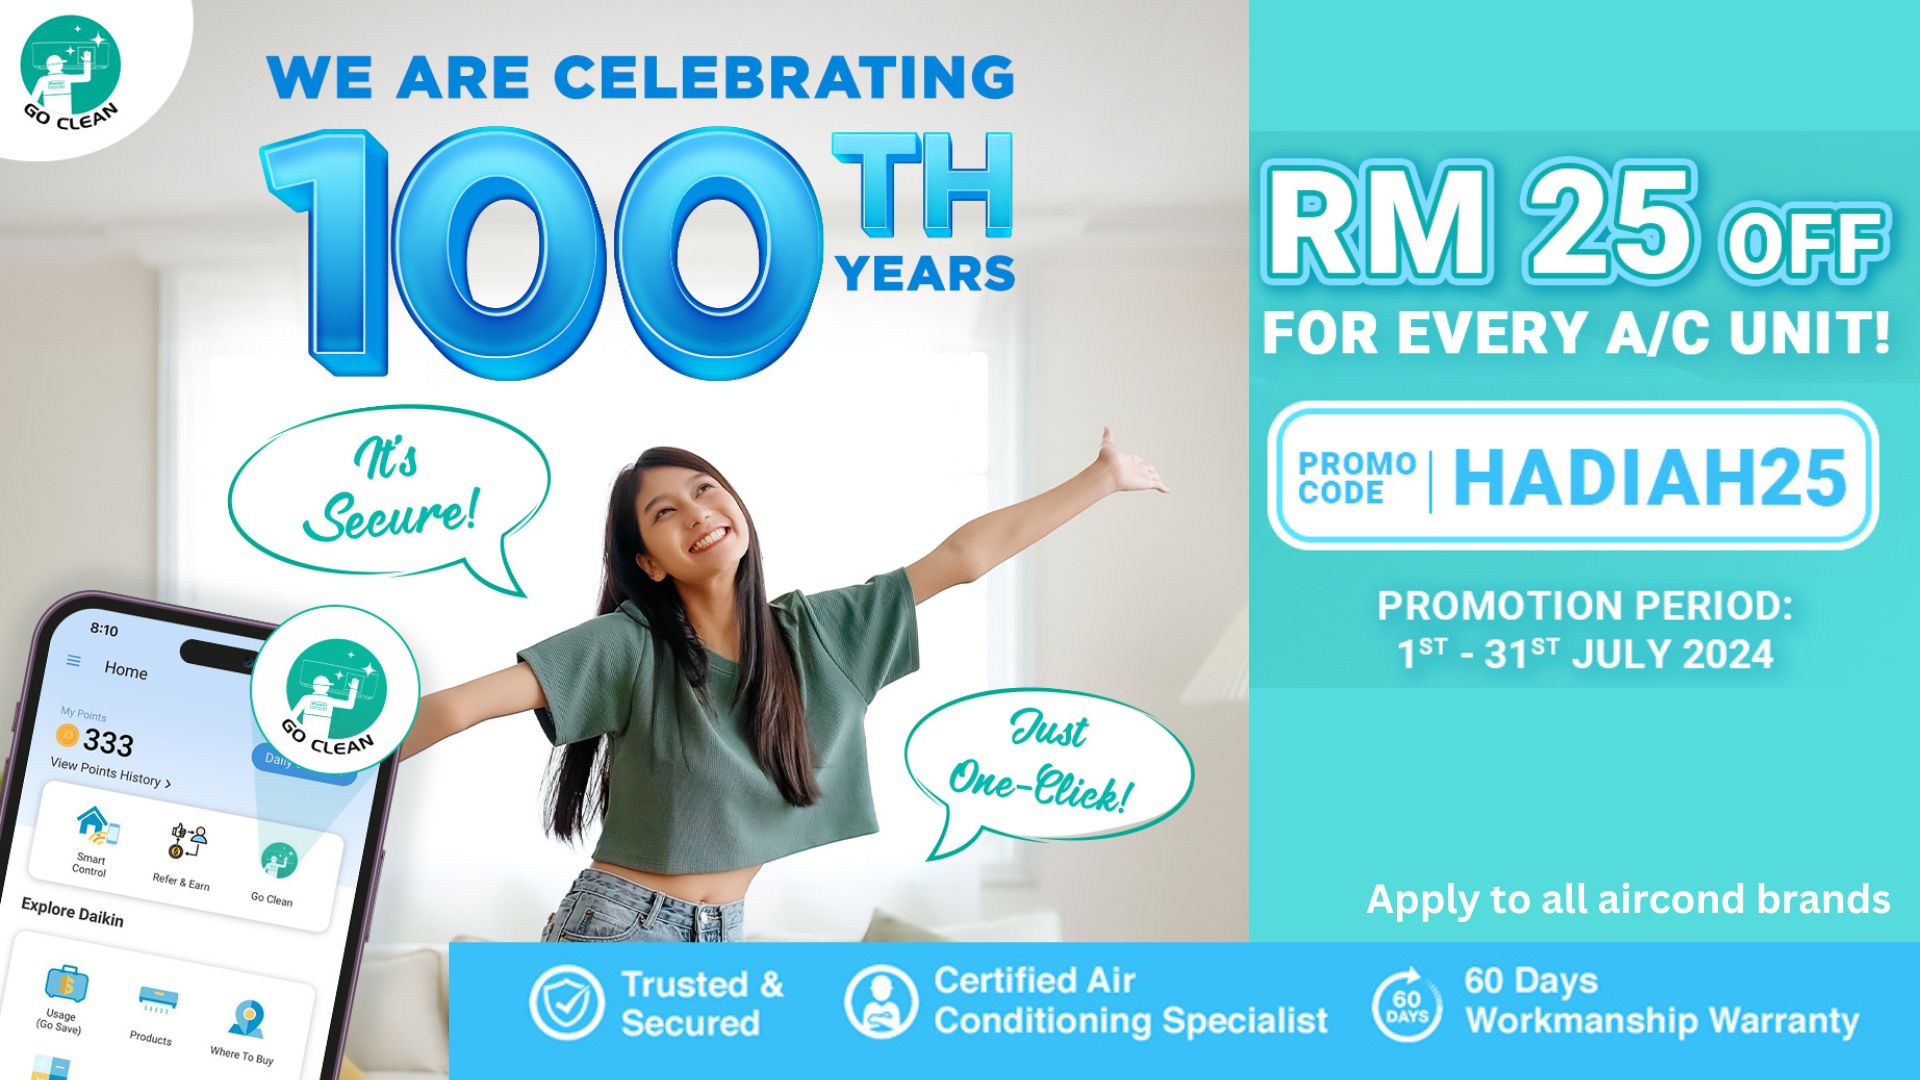 HADIAH25 Get RM25 Off For Every Unit | Daikin Malaysia